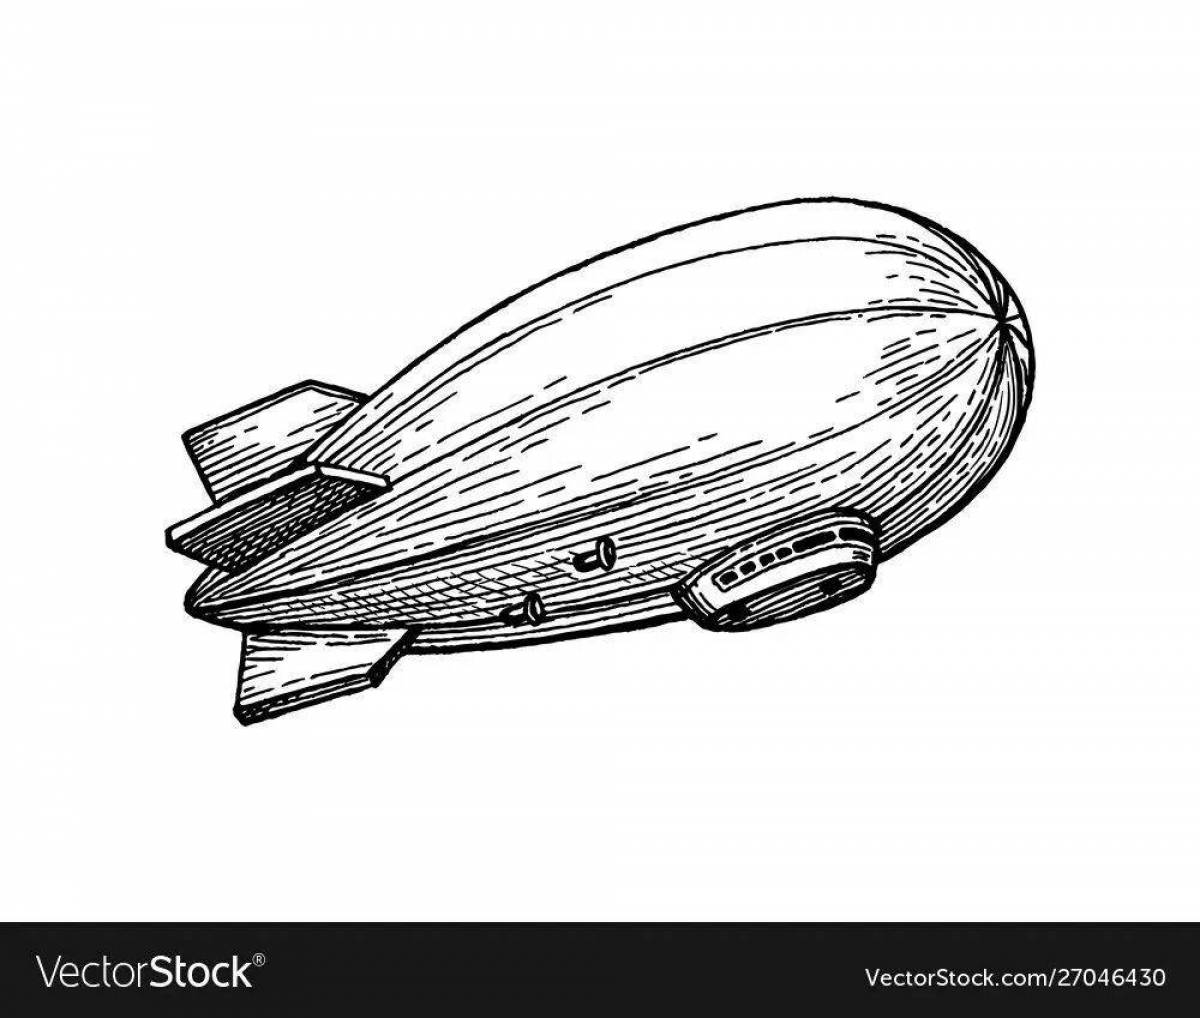 Amazing airship coloring pages for kids